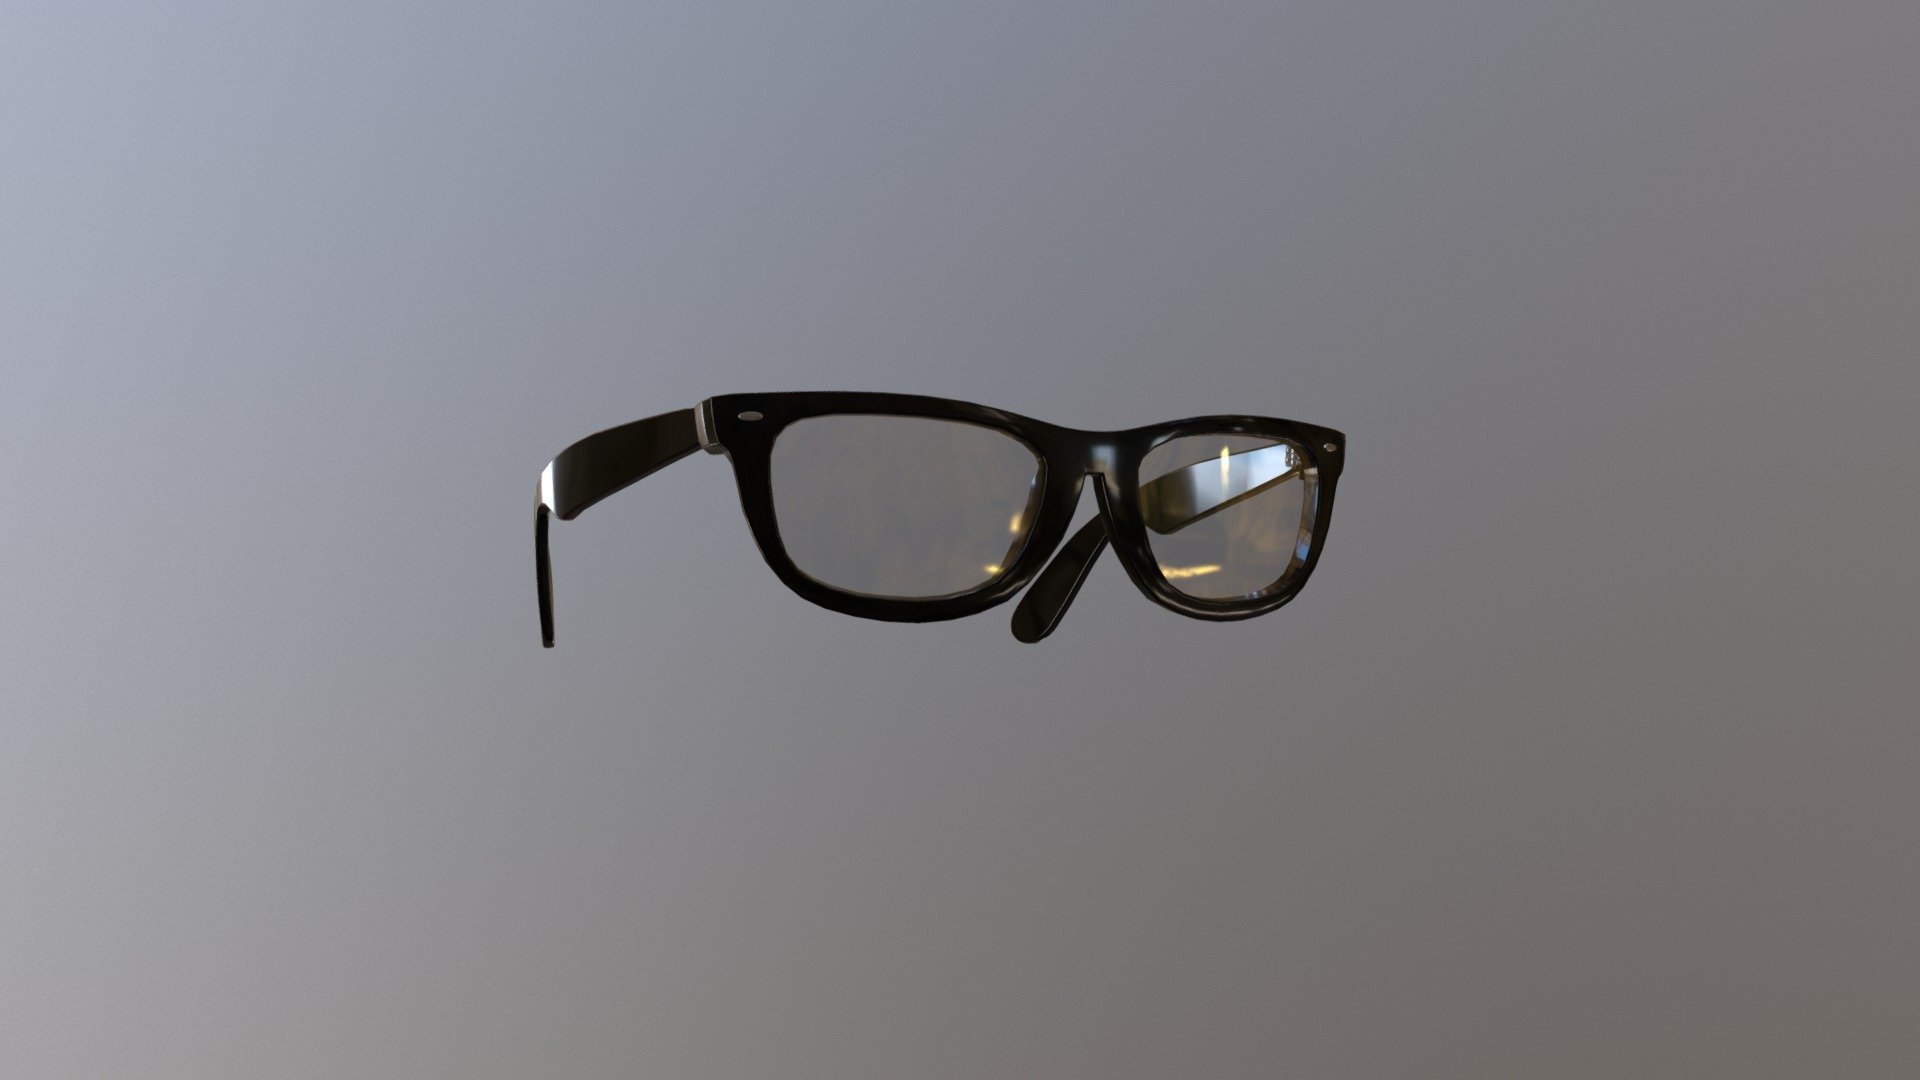 Glasses low-poly model "download"